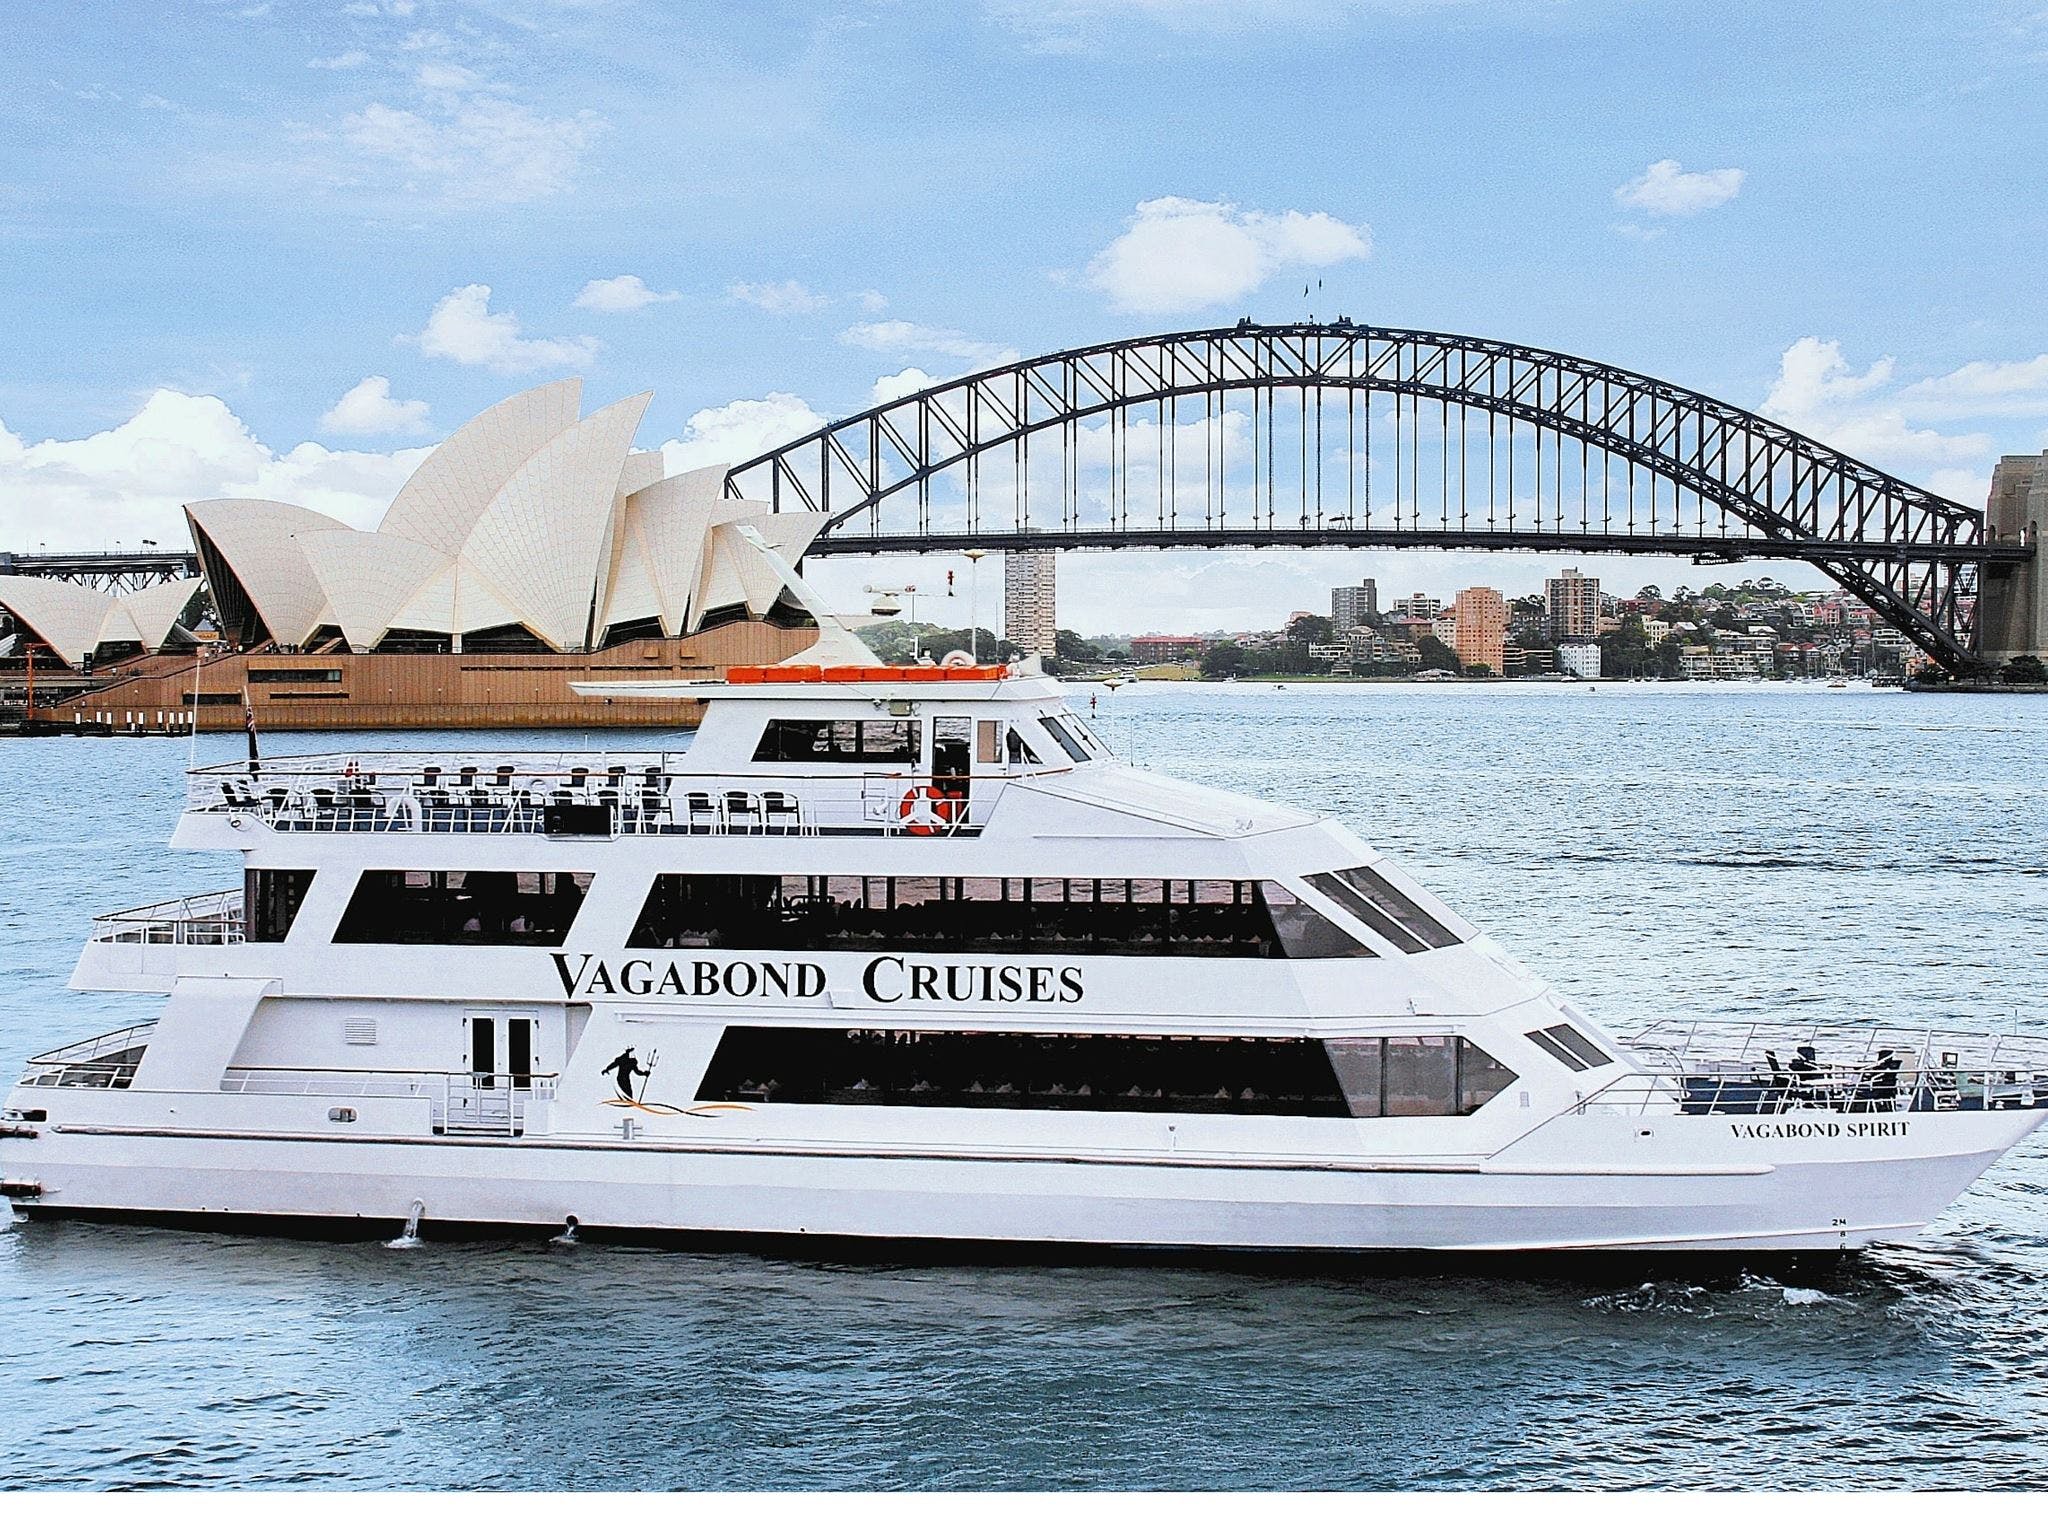 Melbourne Cup Lunch Cruise with Vagabond Cruises - Pubs and Clubs